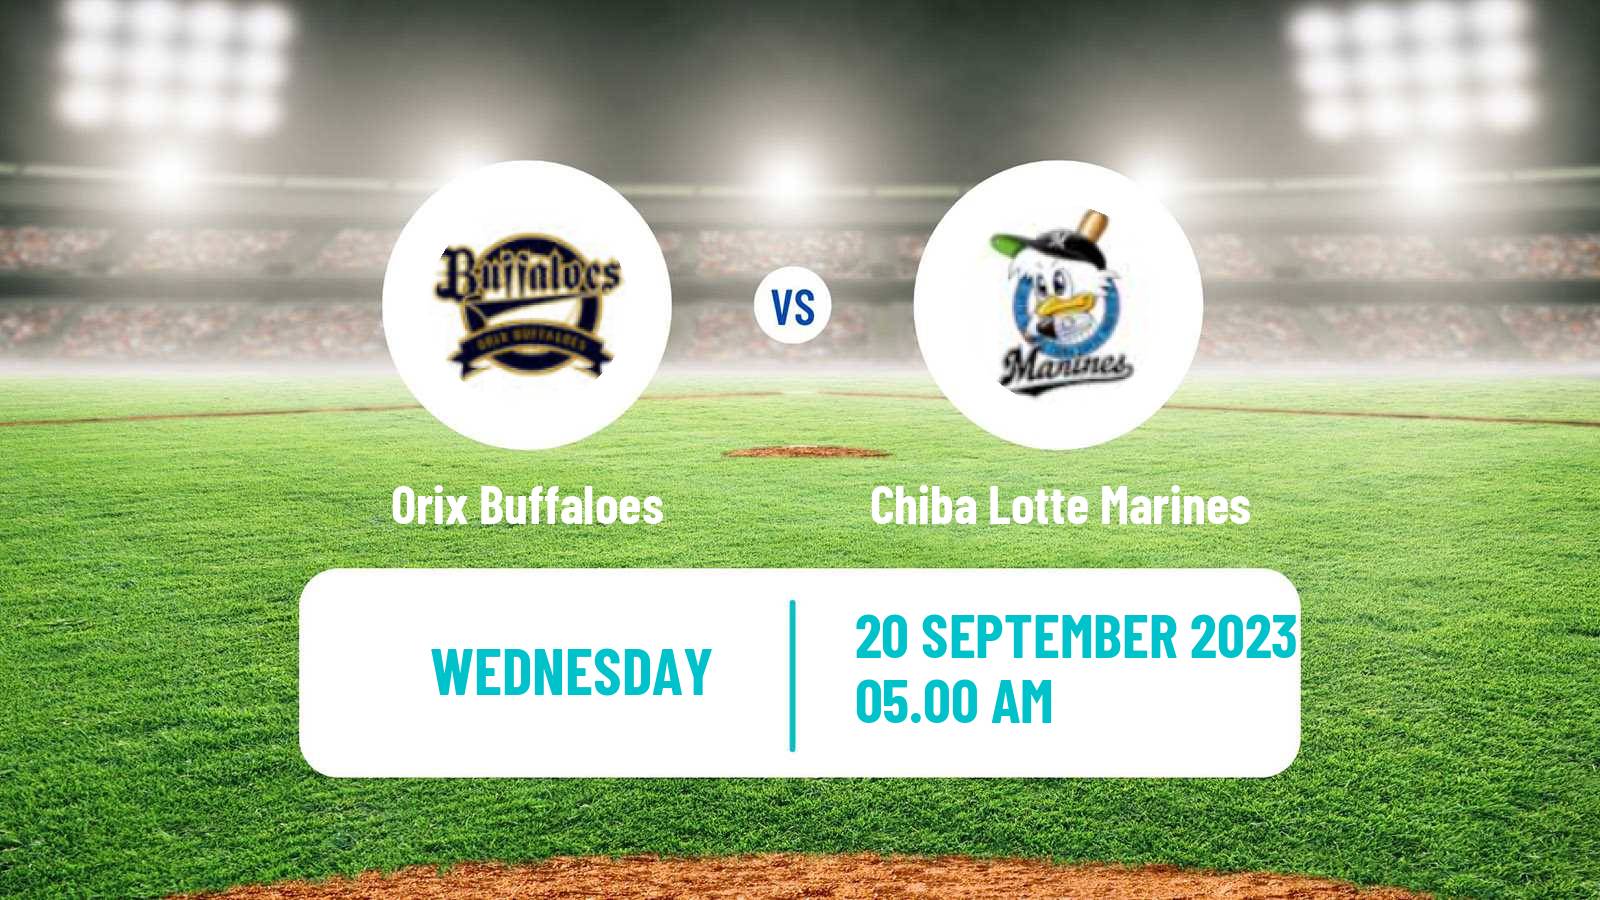 Orix Buffaloes Chiba Lotte Marines predictions, where to watch, live